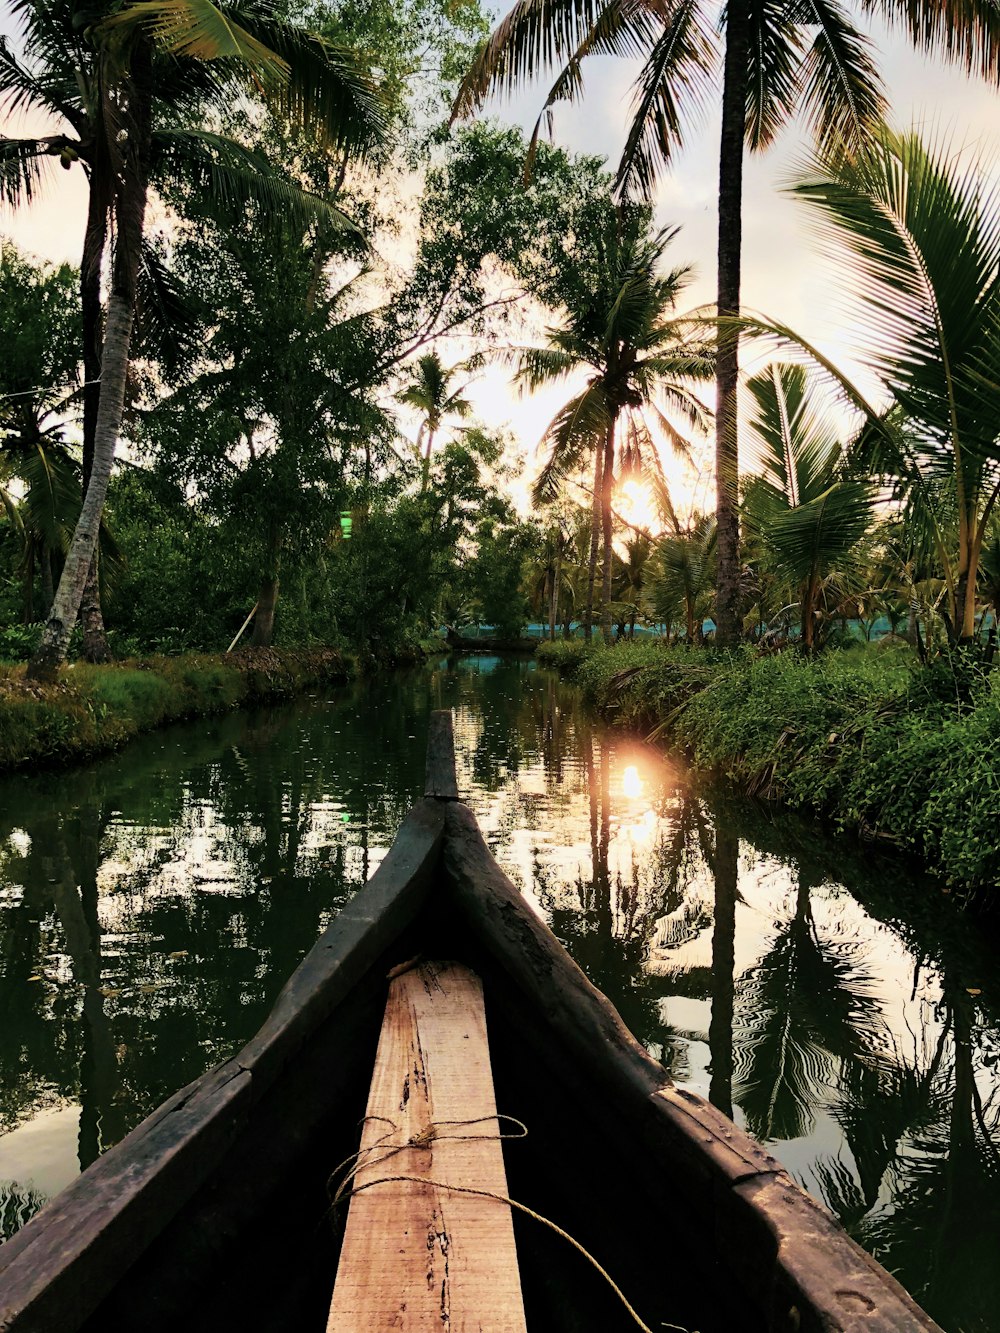 500+ Kerala Pictures [Scenic Travel Photos] | Download Free Images on  Unsplash